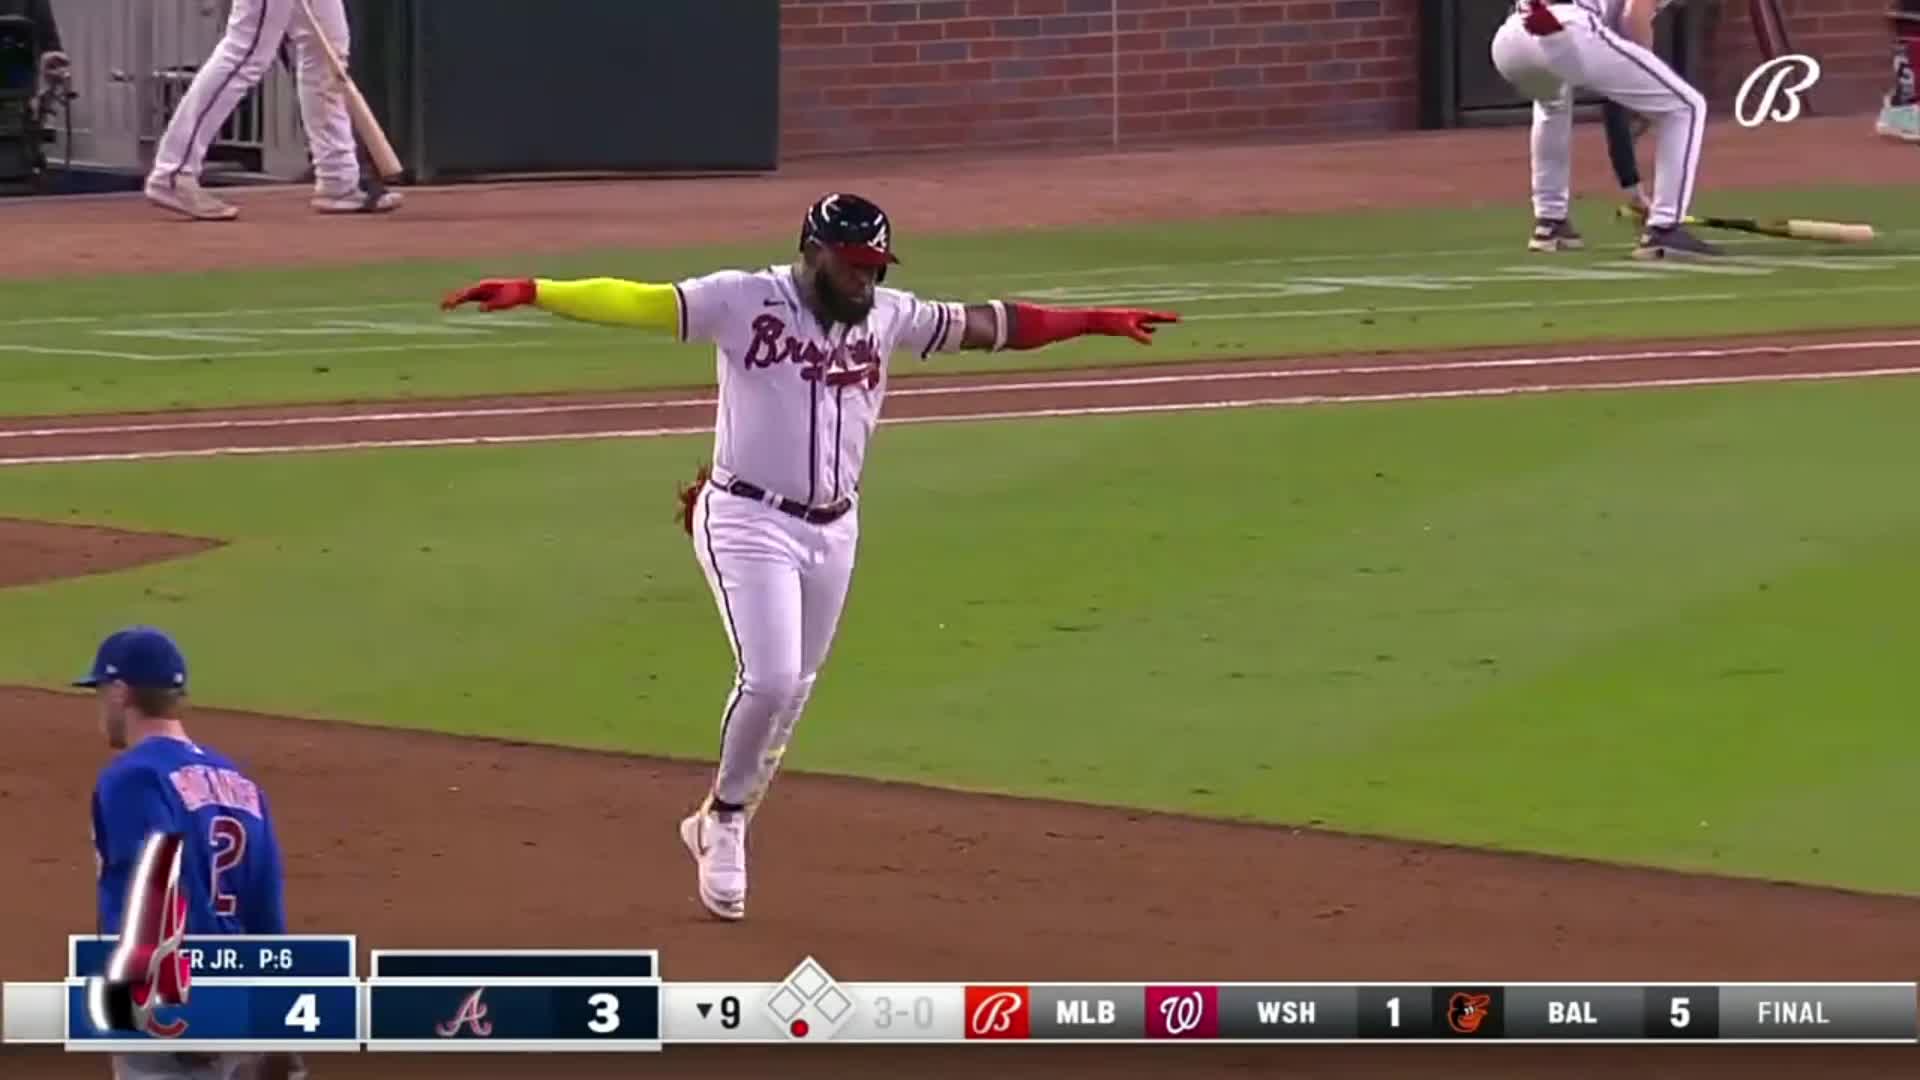 Marcell Ozuna SMASHES homer to tie it up for Braves in NLCS Game 4! 